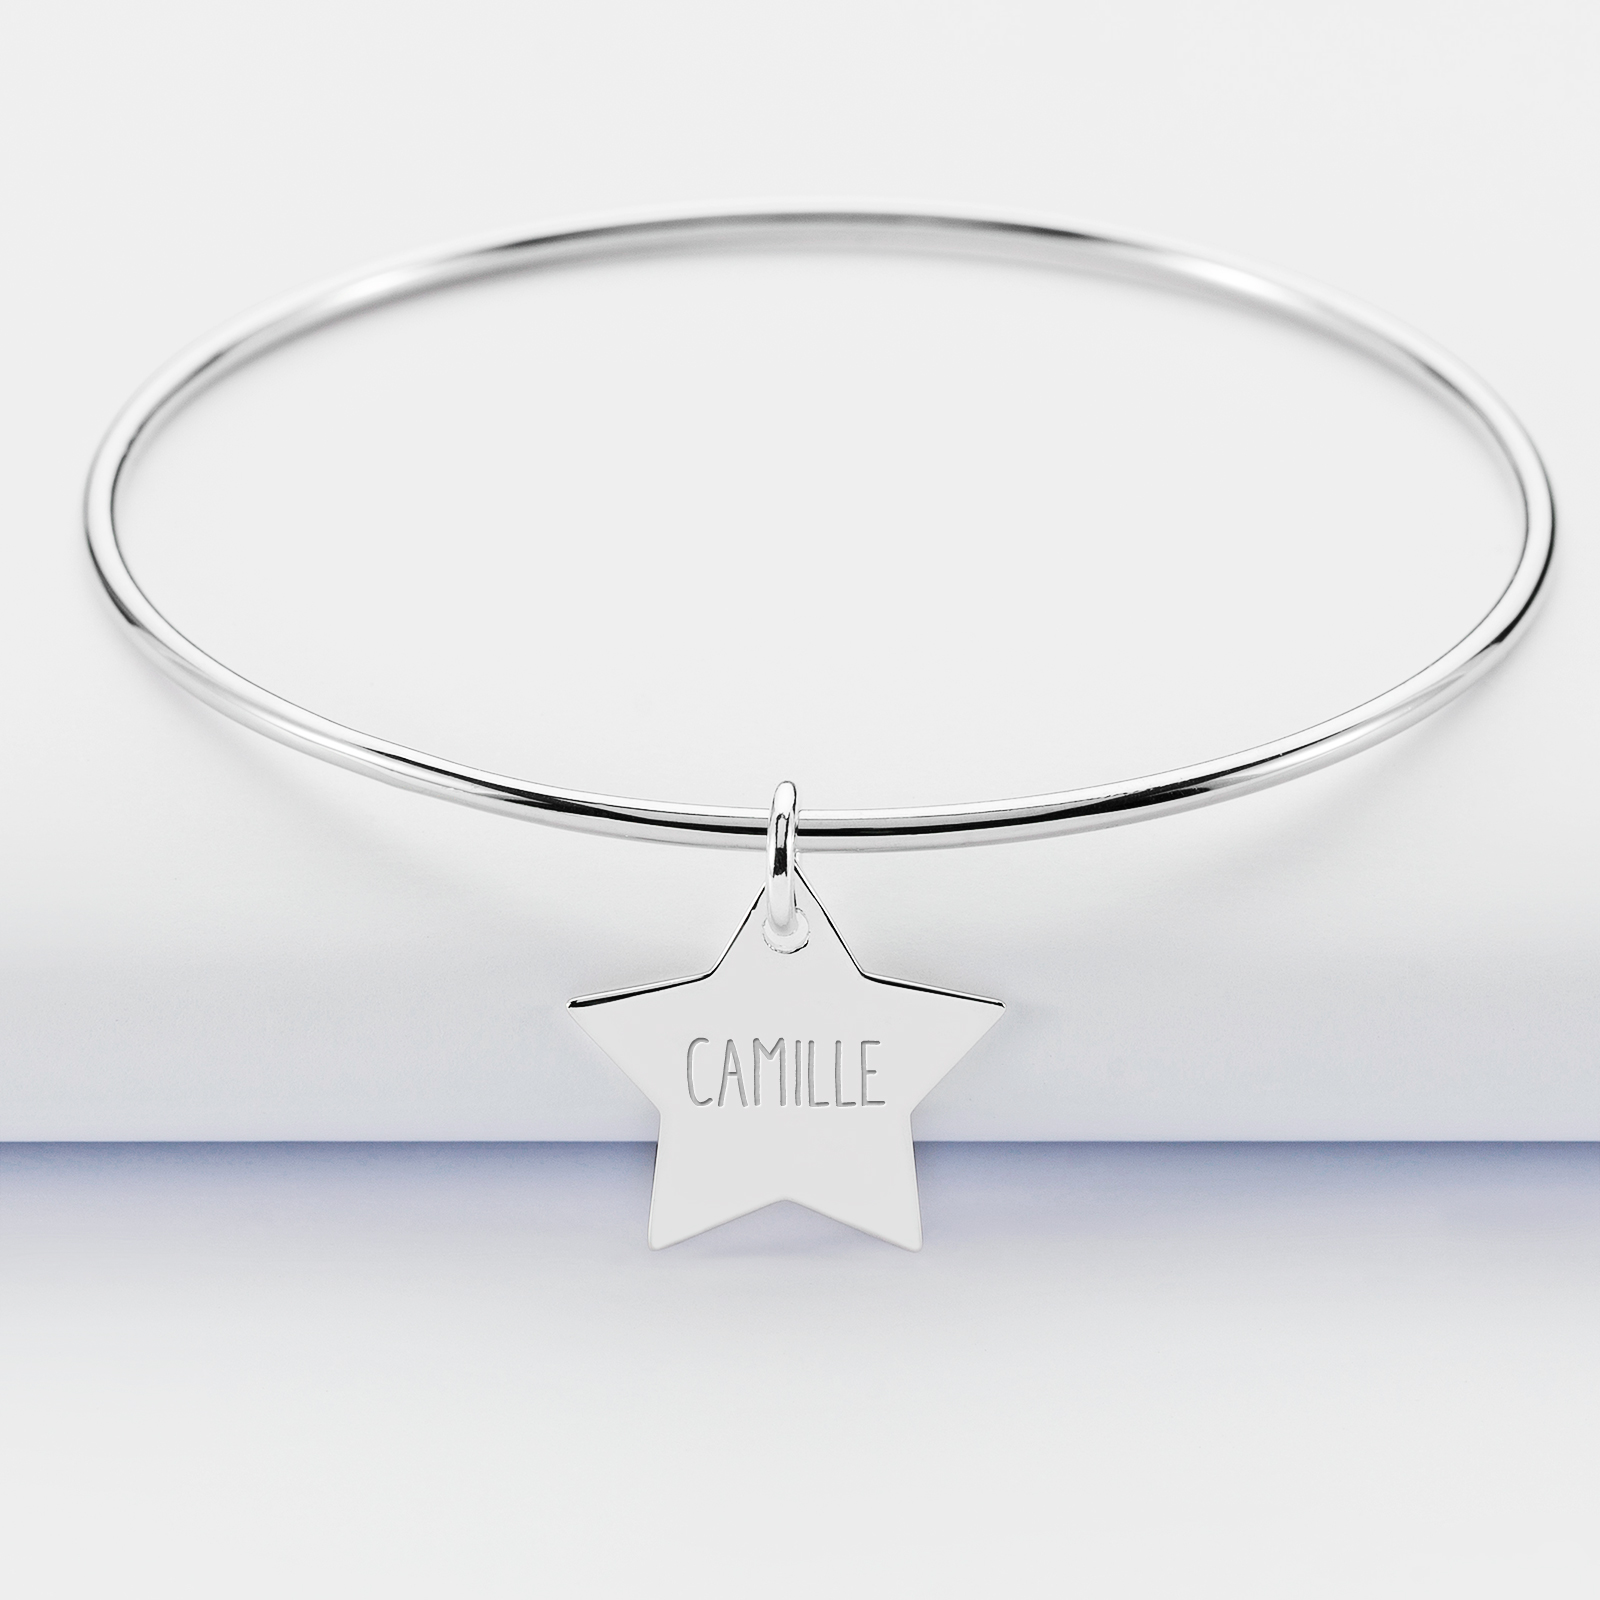 Personalised silver bangle and engraved star medallion 20x20 mm